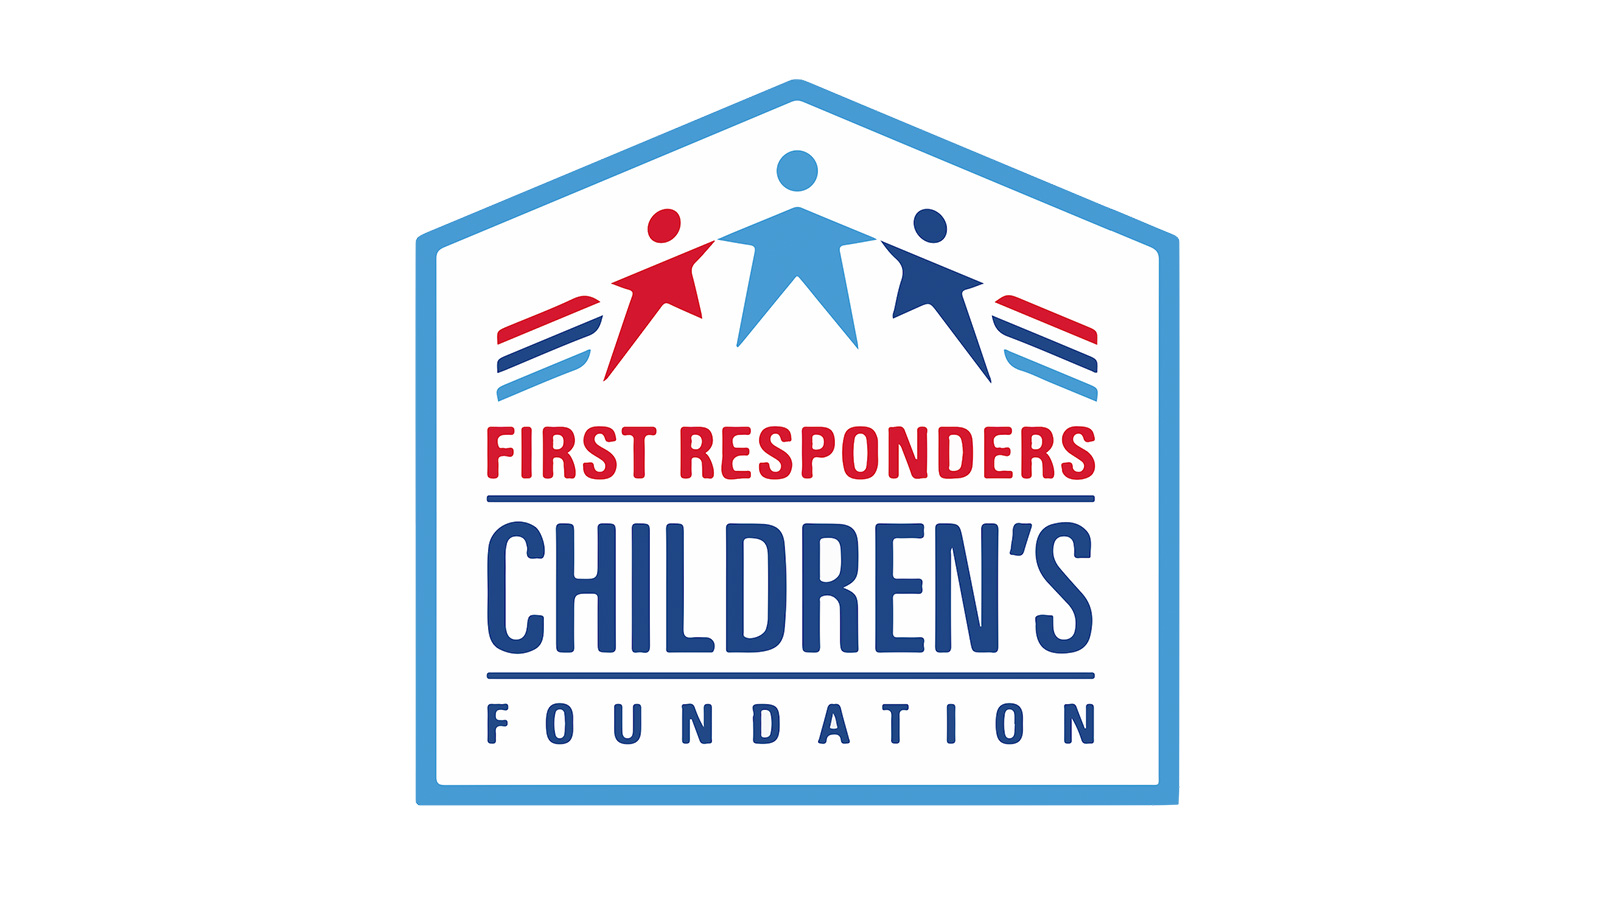 FRCF Awards 343 Children of First Responders Nationwide With Over $1 Million in Scholarships